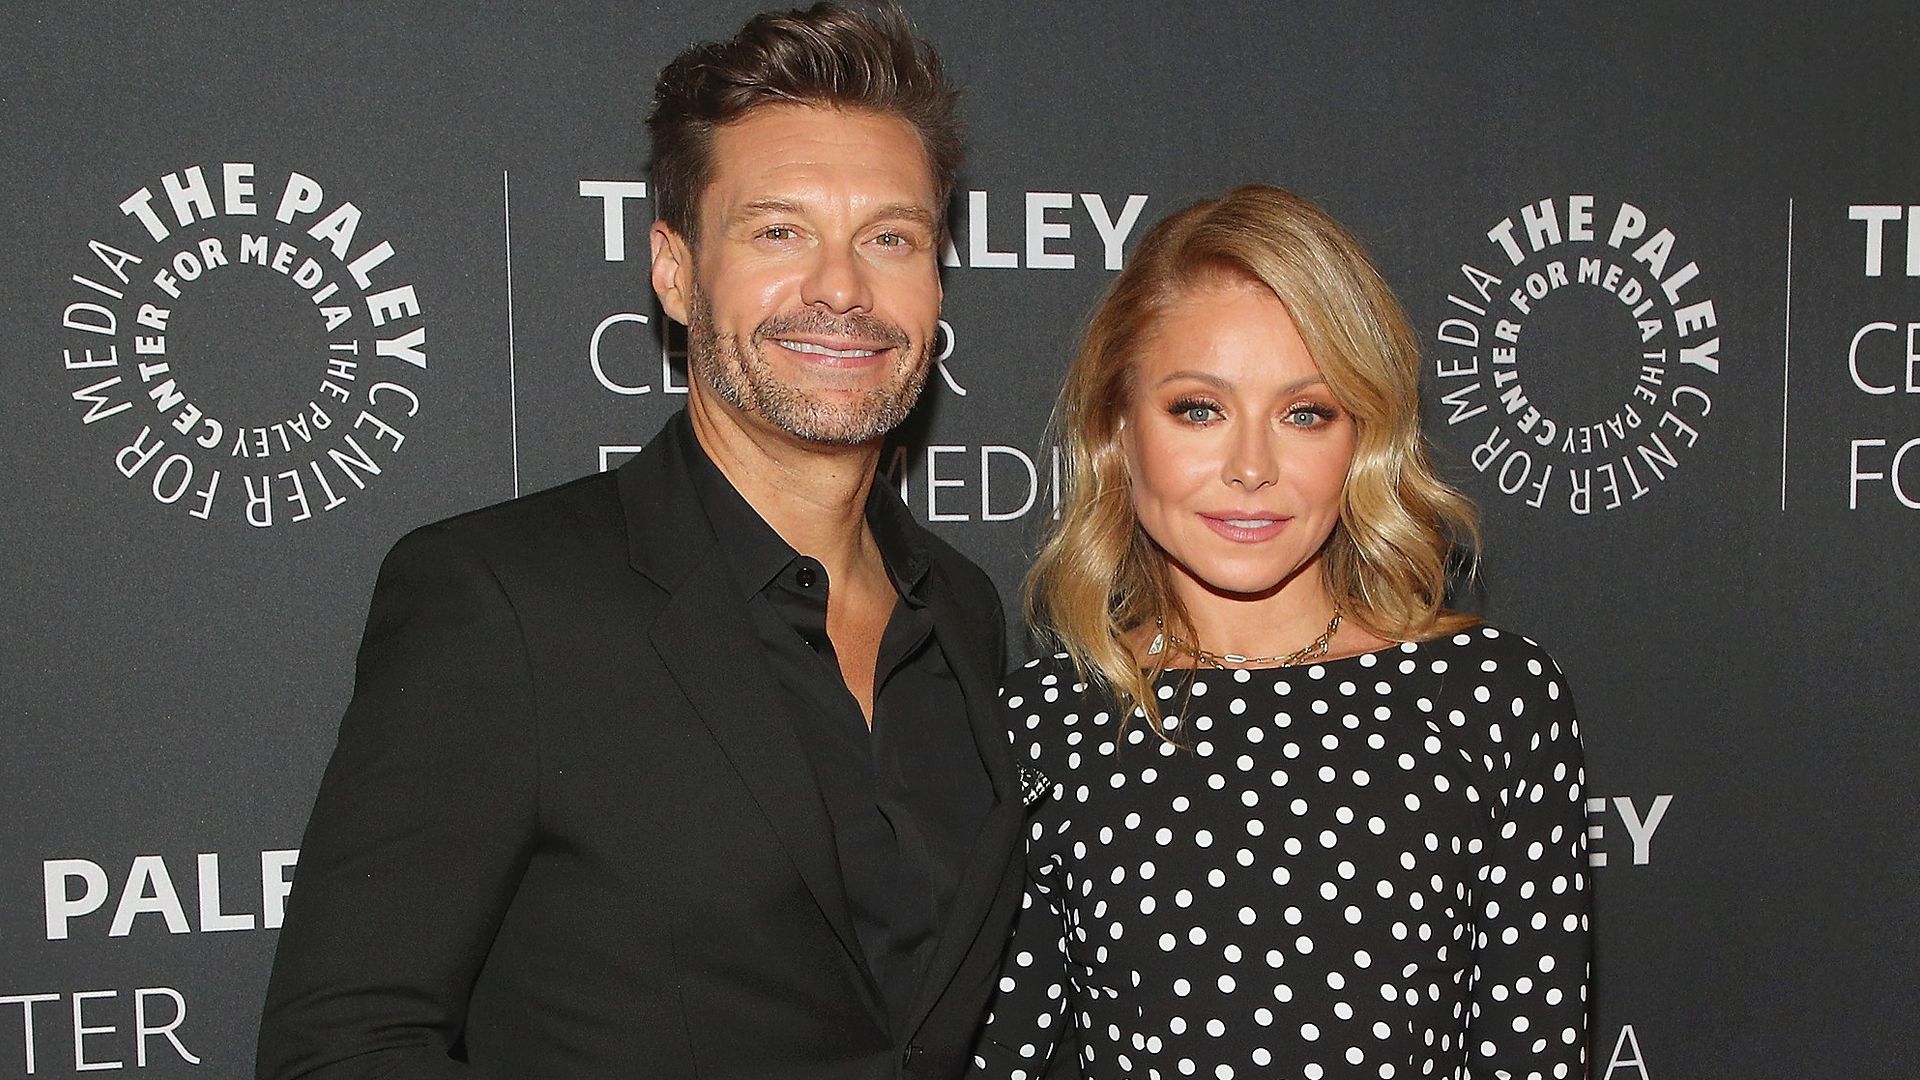 Kelly Ripa and Ryan Seacrest on a red carpet together